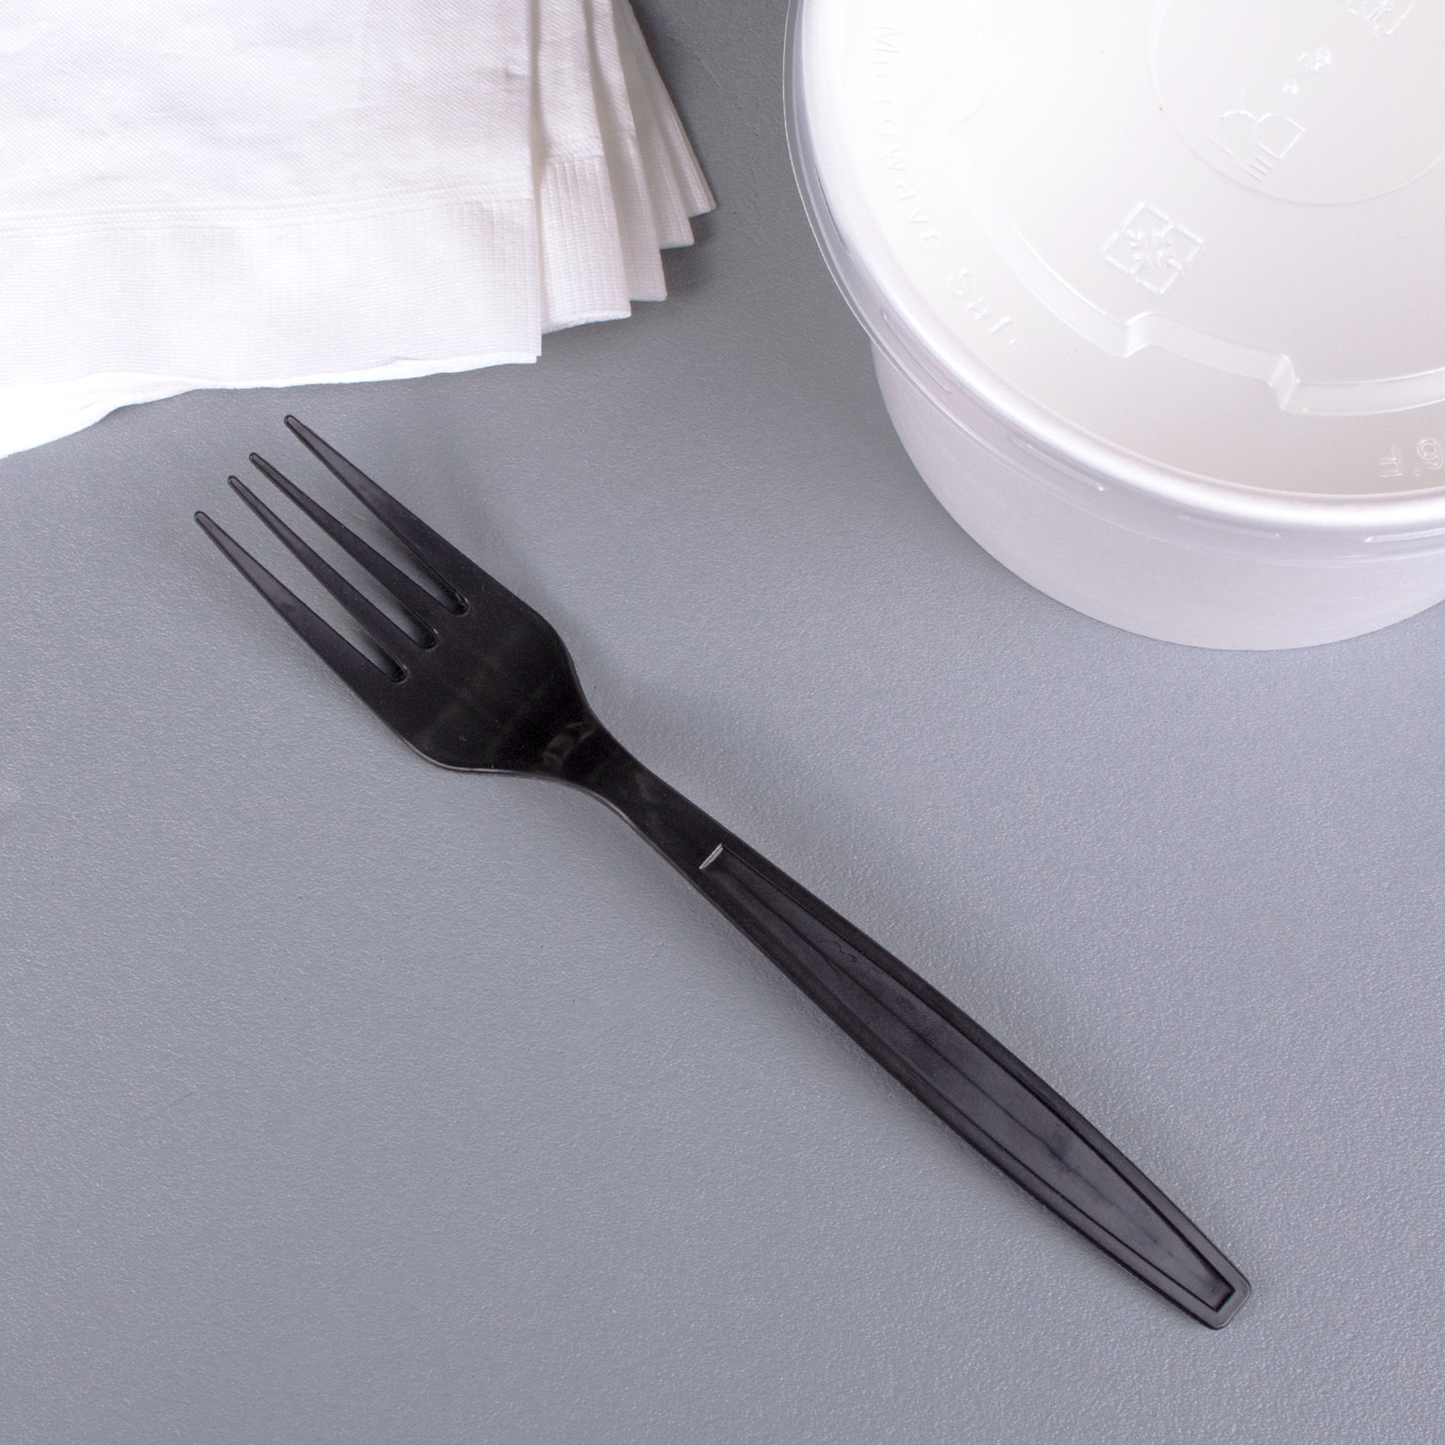 Karat PP Plastic Heavy Weight Forks - Black - Wrapped - 1,000 ct